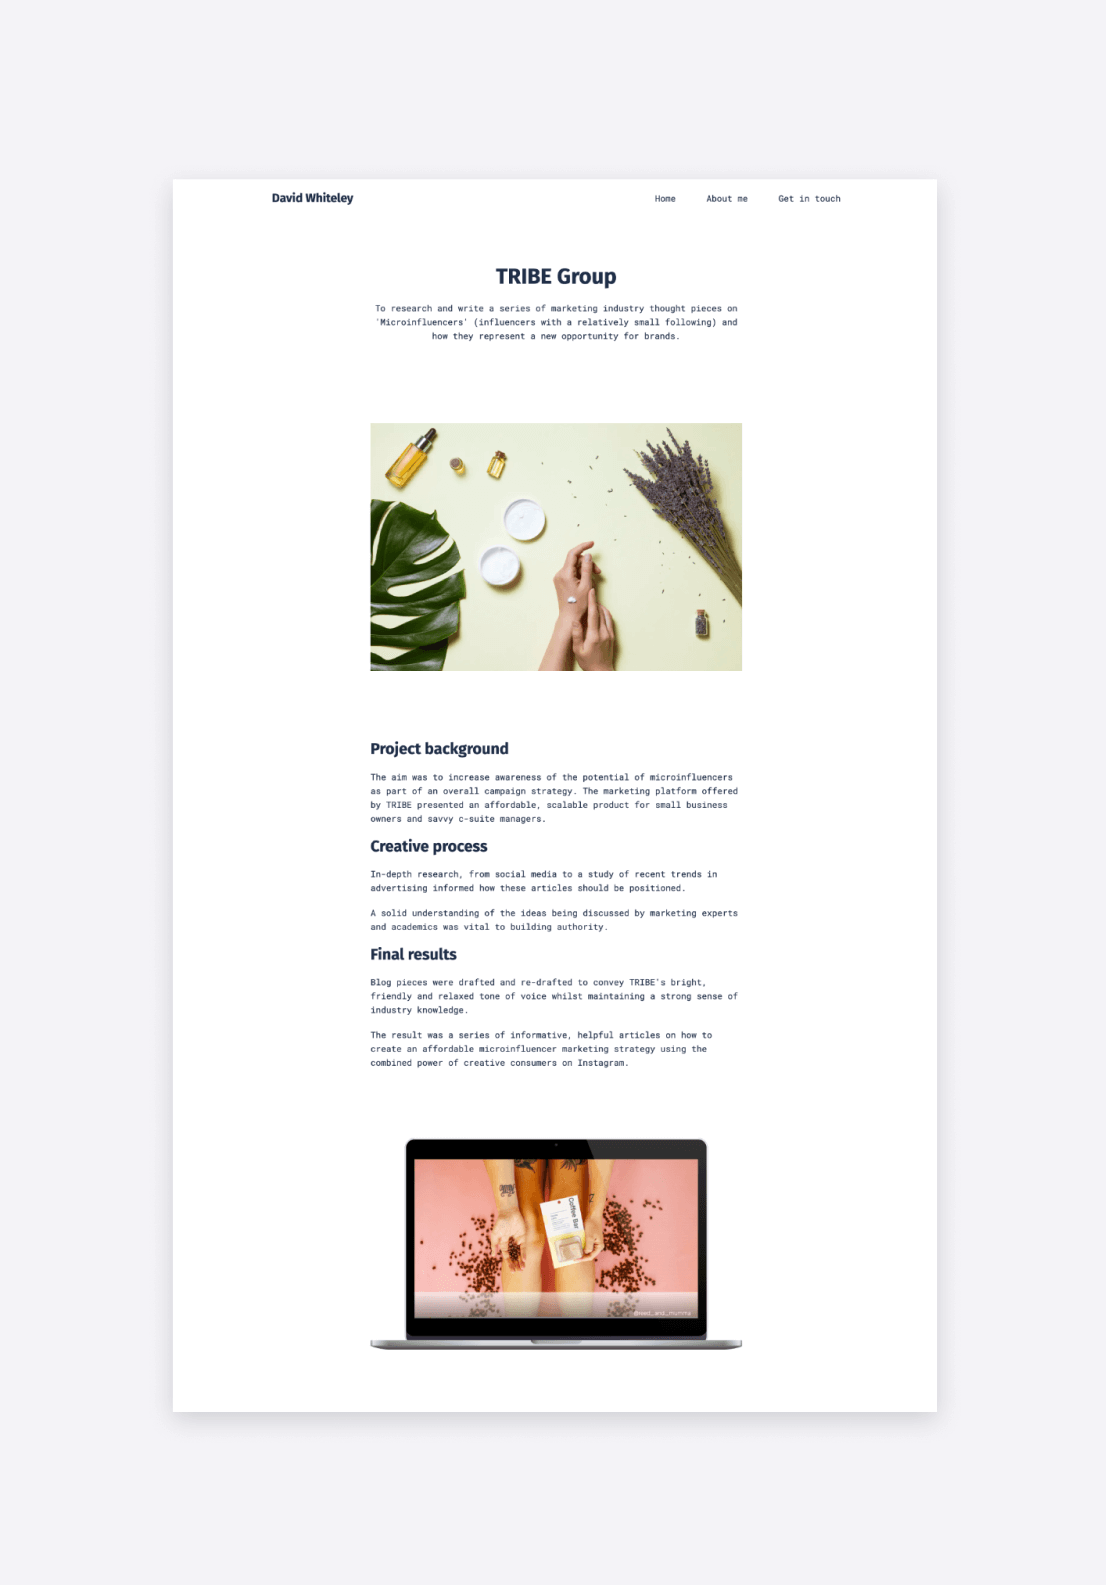 A writing case study example from the portfolio website of David Whiteley.